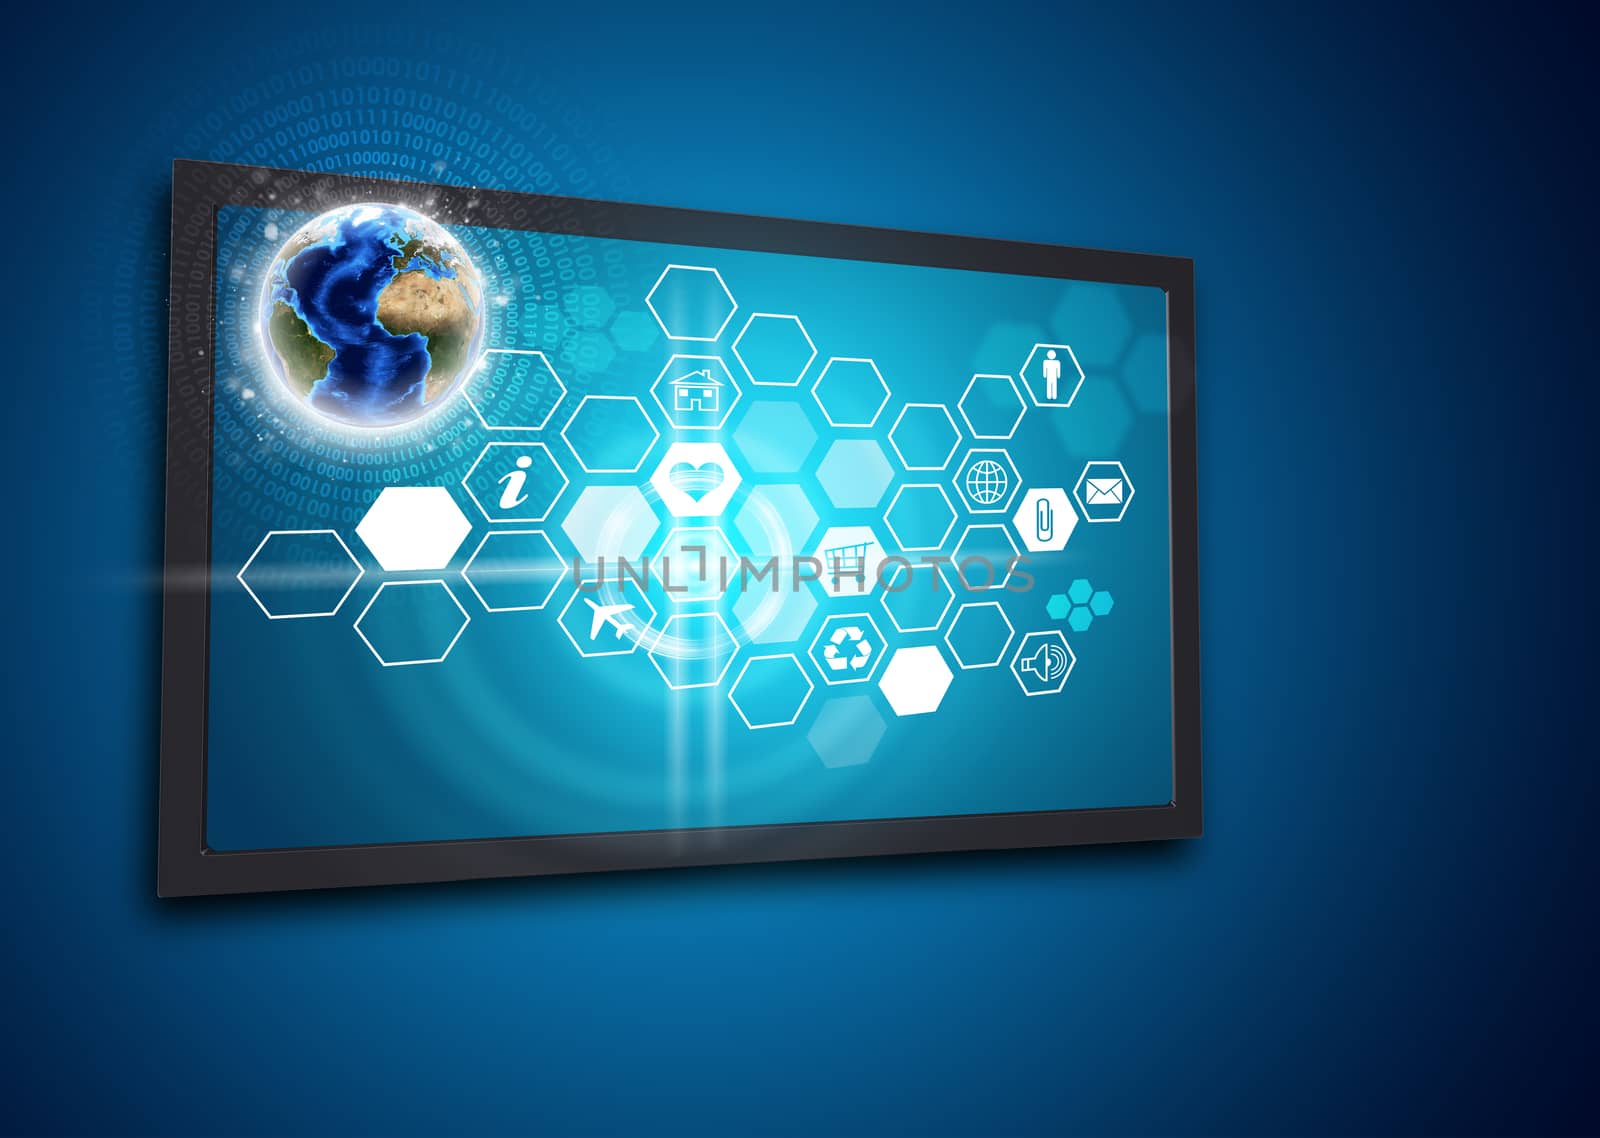 Touchscreen display with Globe and honeycomb shaped icons, on blue background. Element of this image furnished by NASA